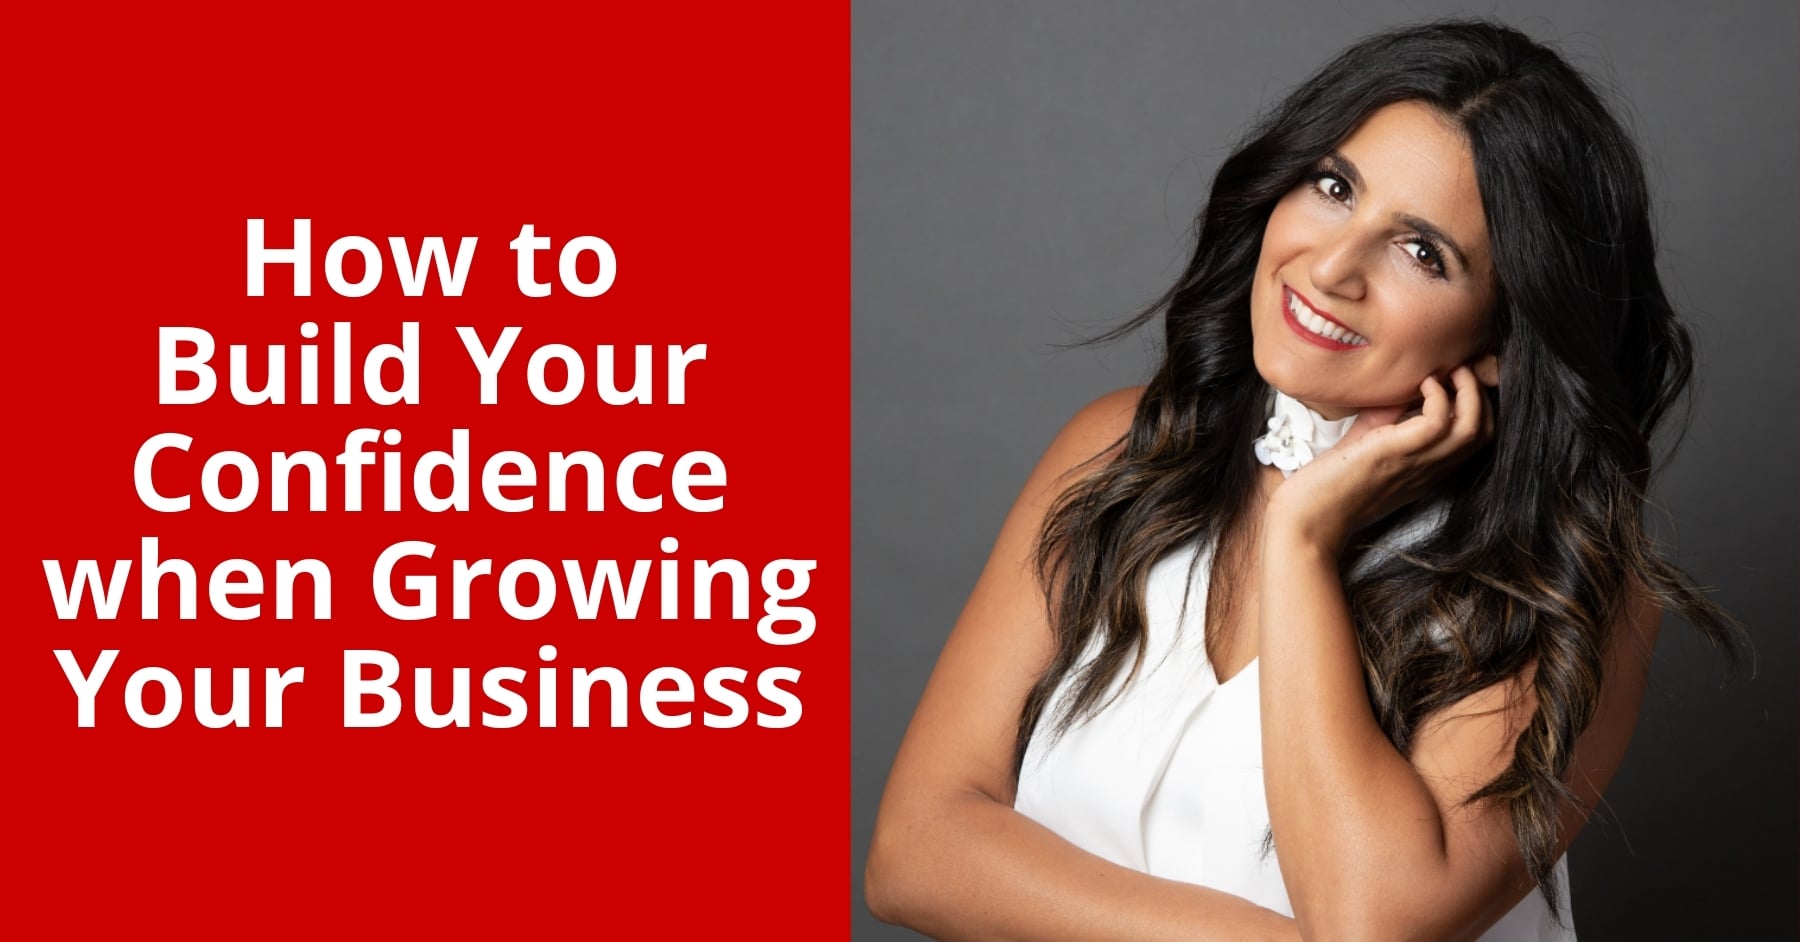 How to Build Your Confidence when Growing Your Business